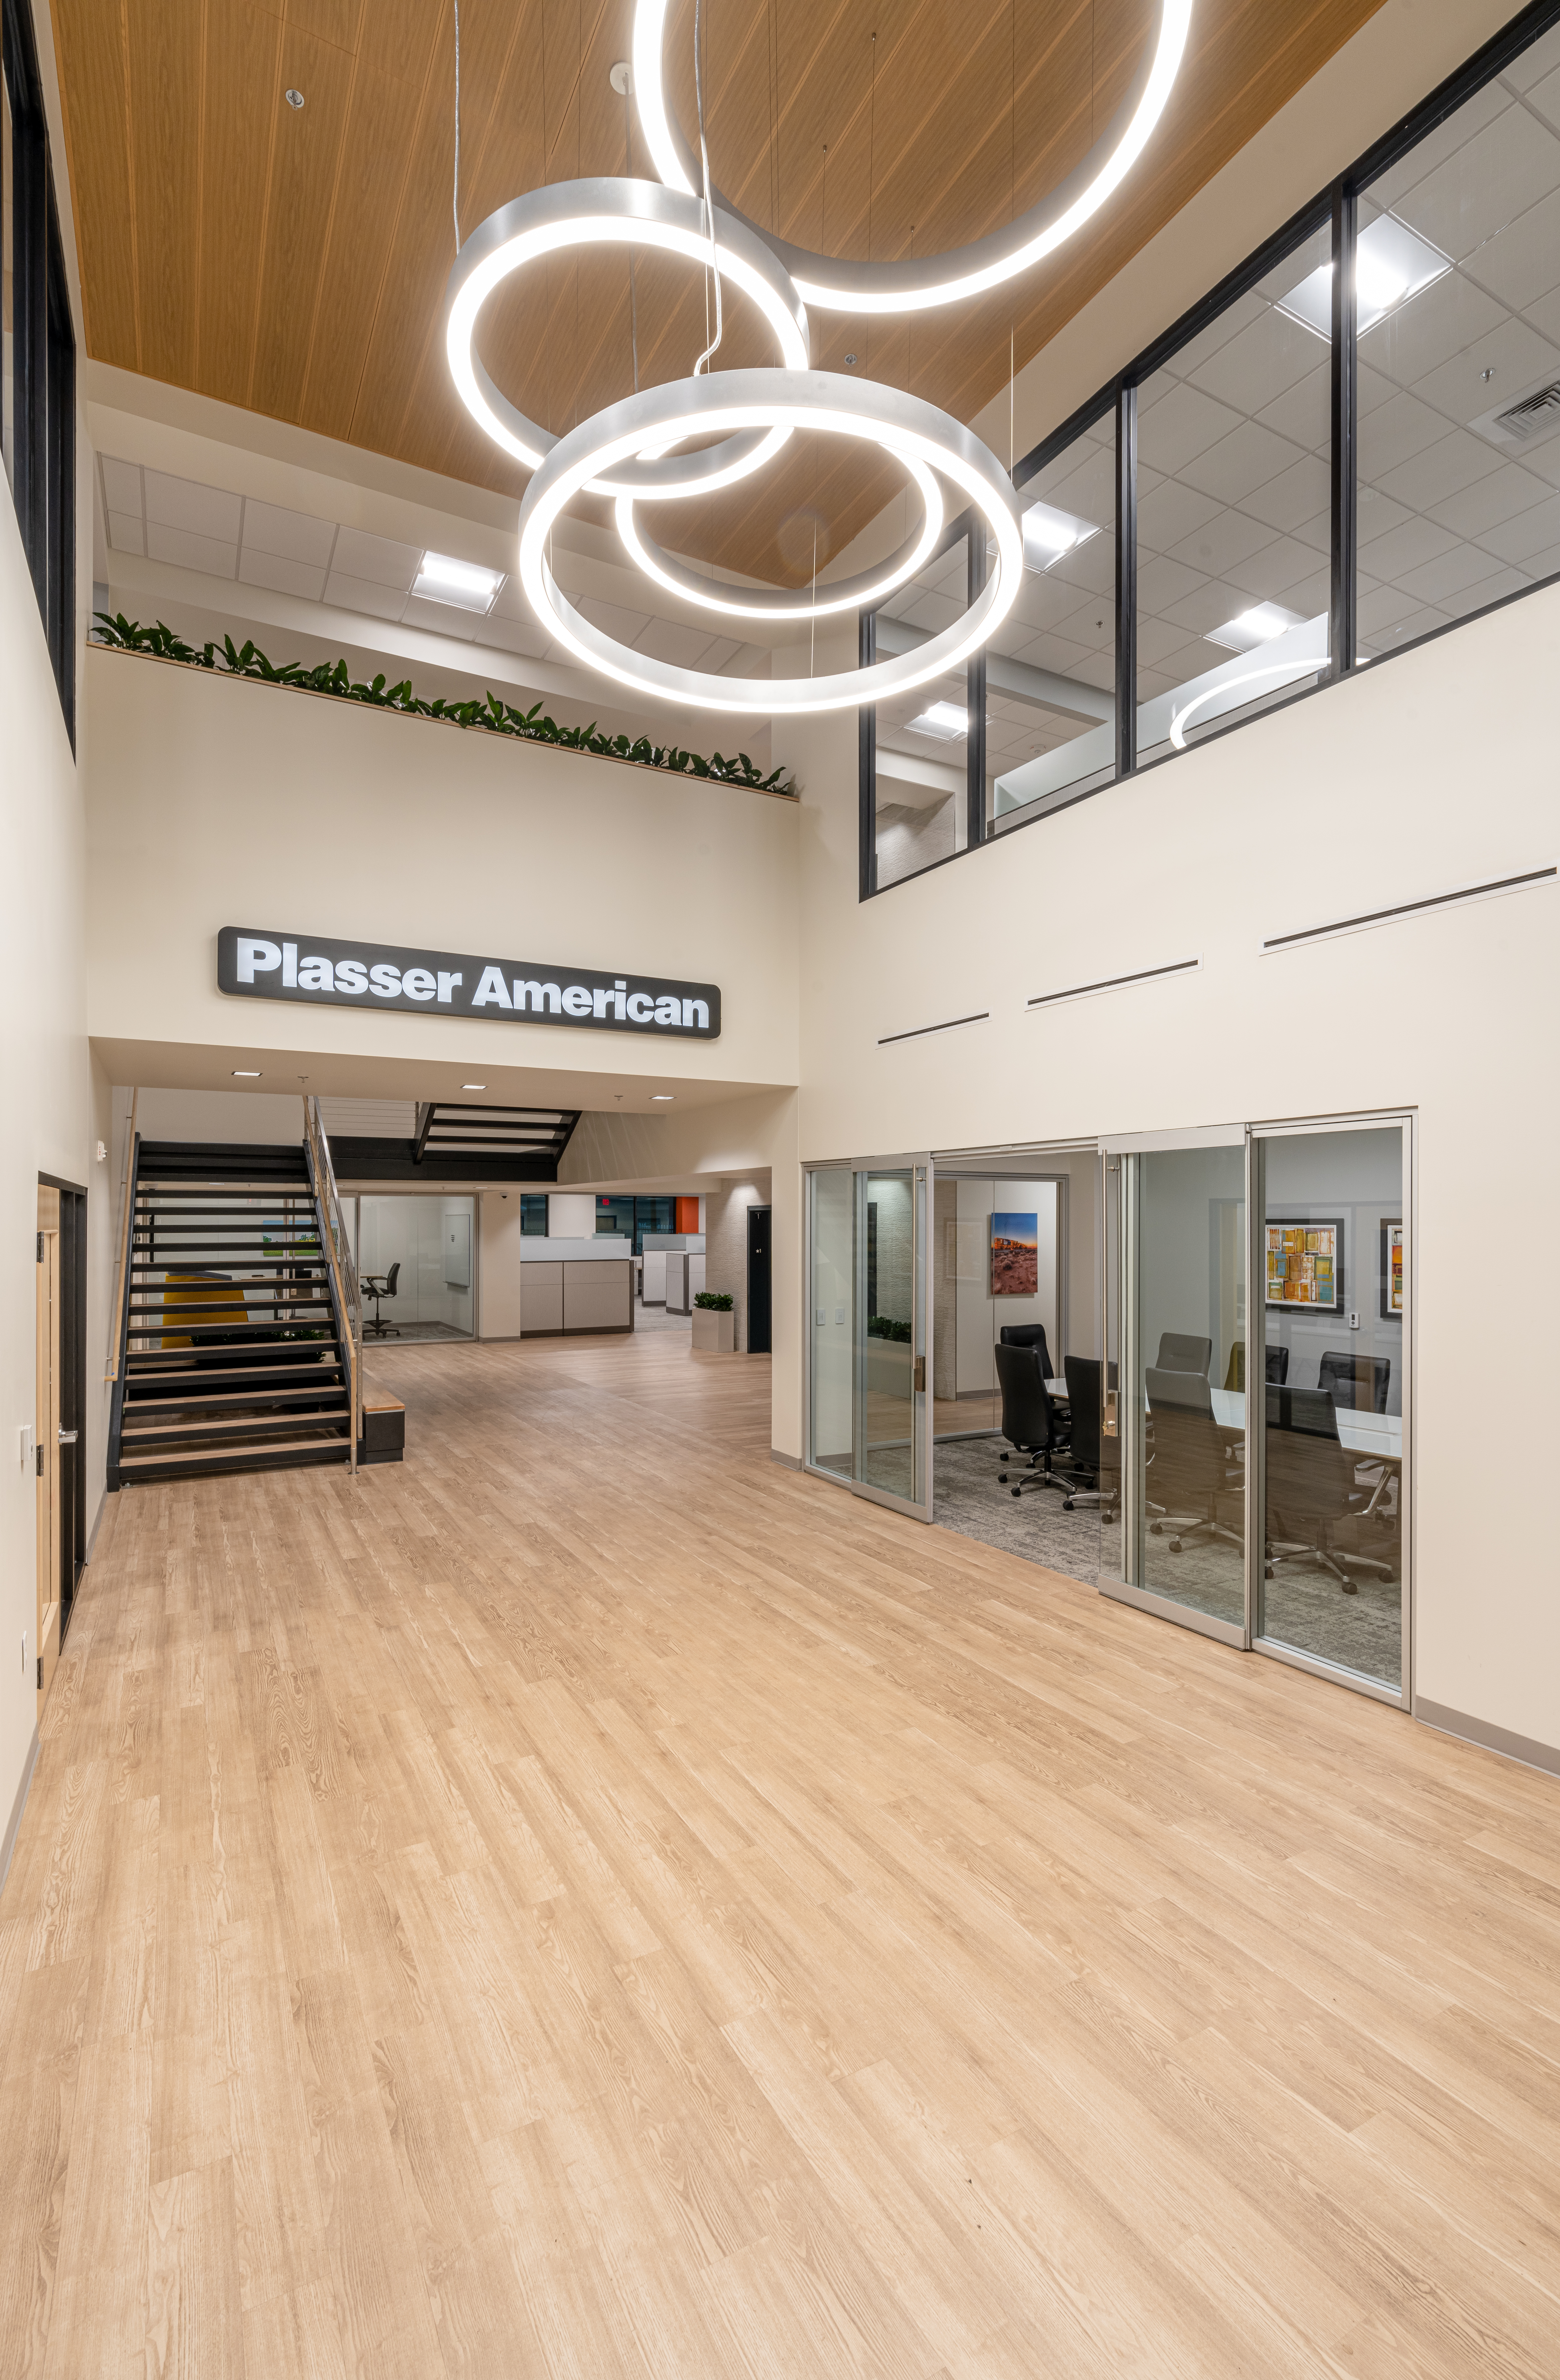 Entry way for Plasser American.